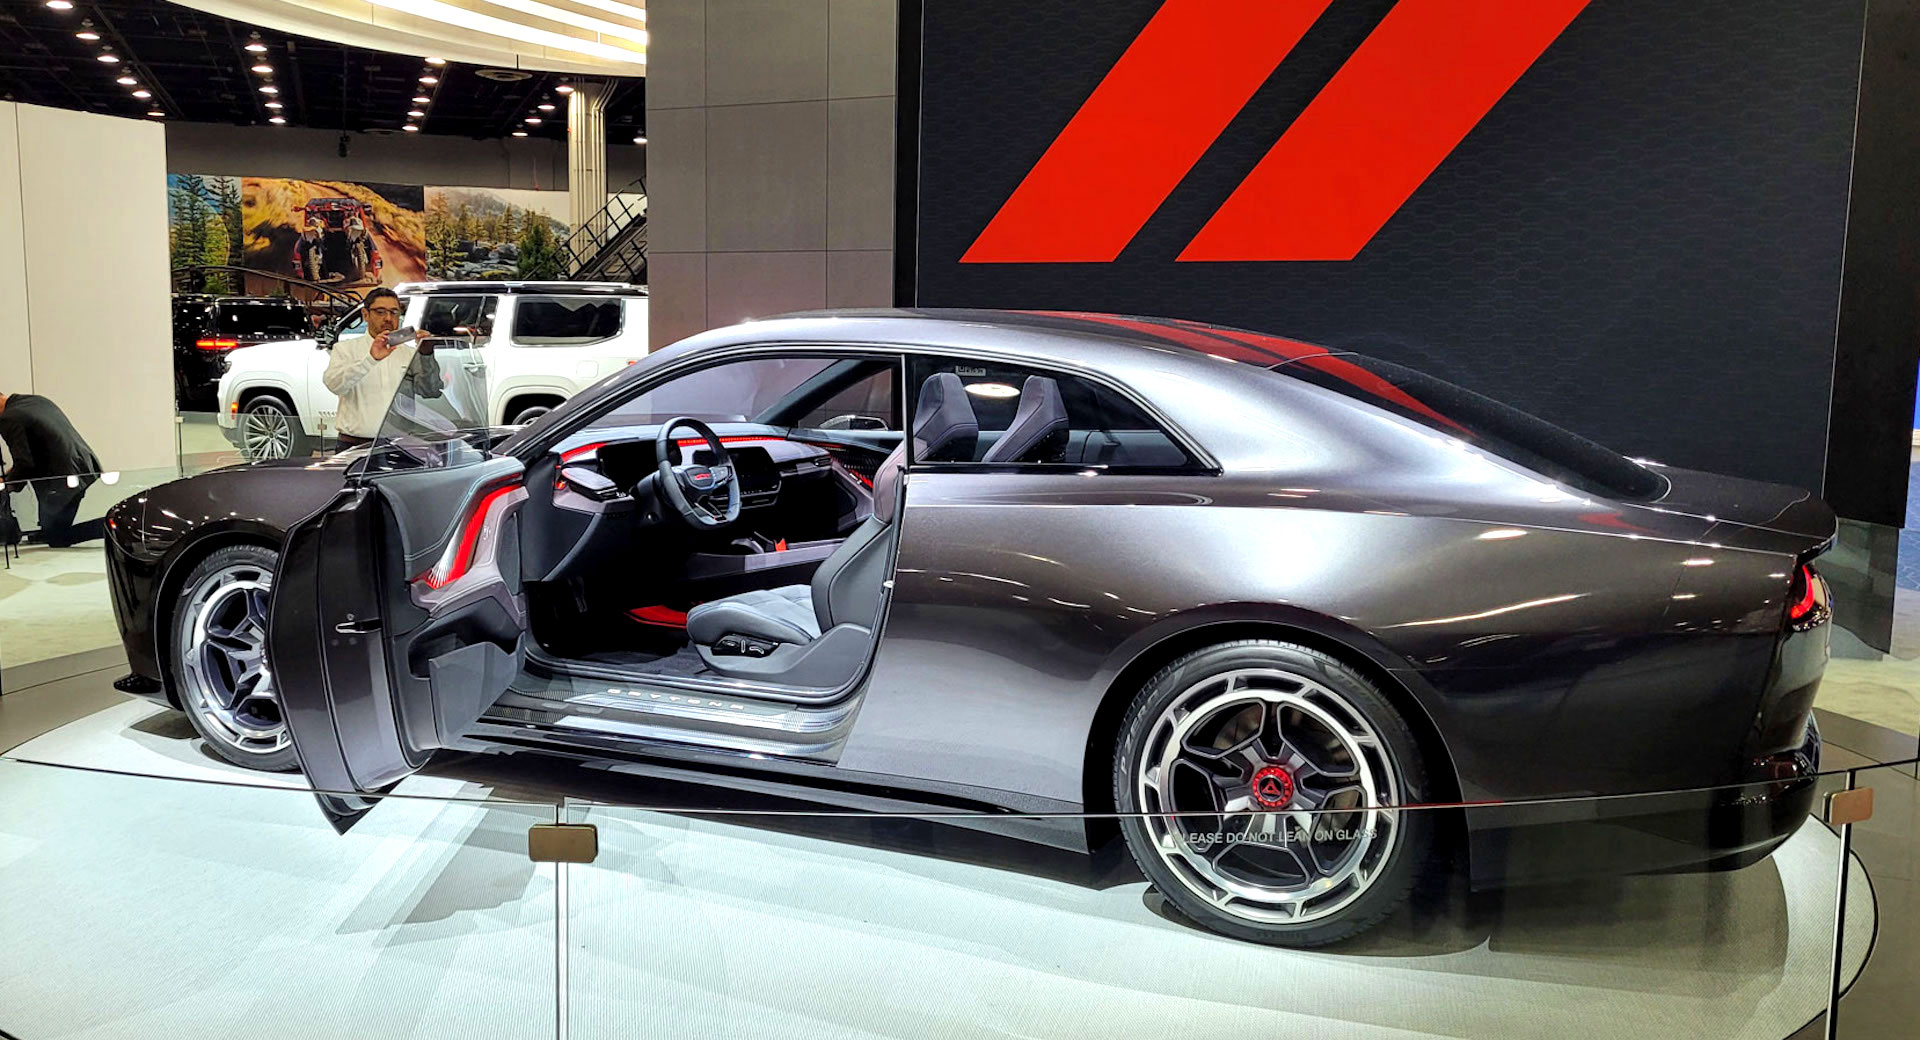 Dodge says its all-electric Charger concept is as loud as gas